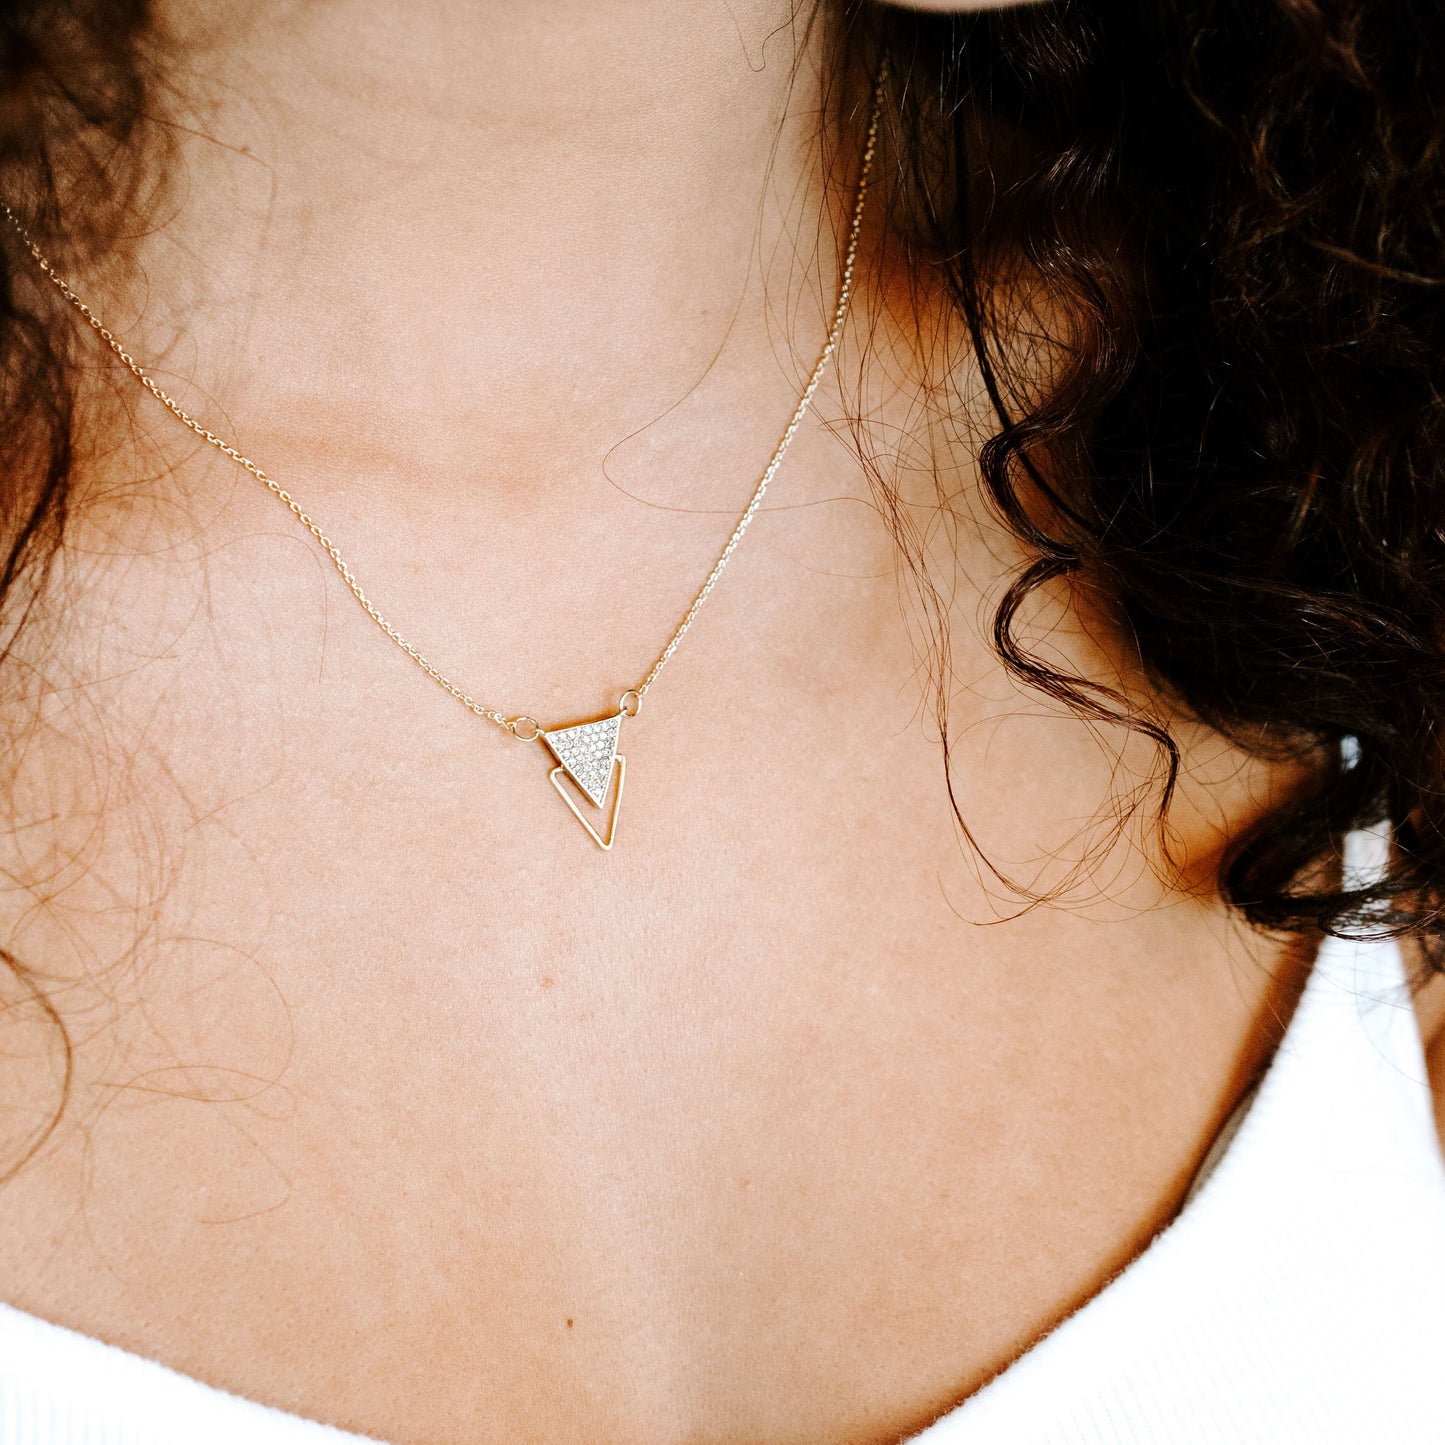 Brooklyn Necklace | Gold | Model Image | Uncommon James